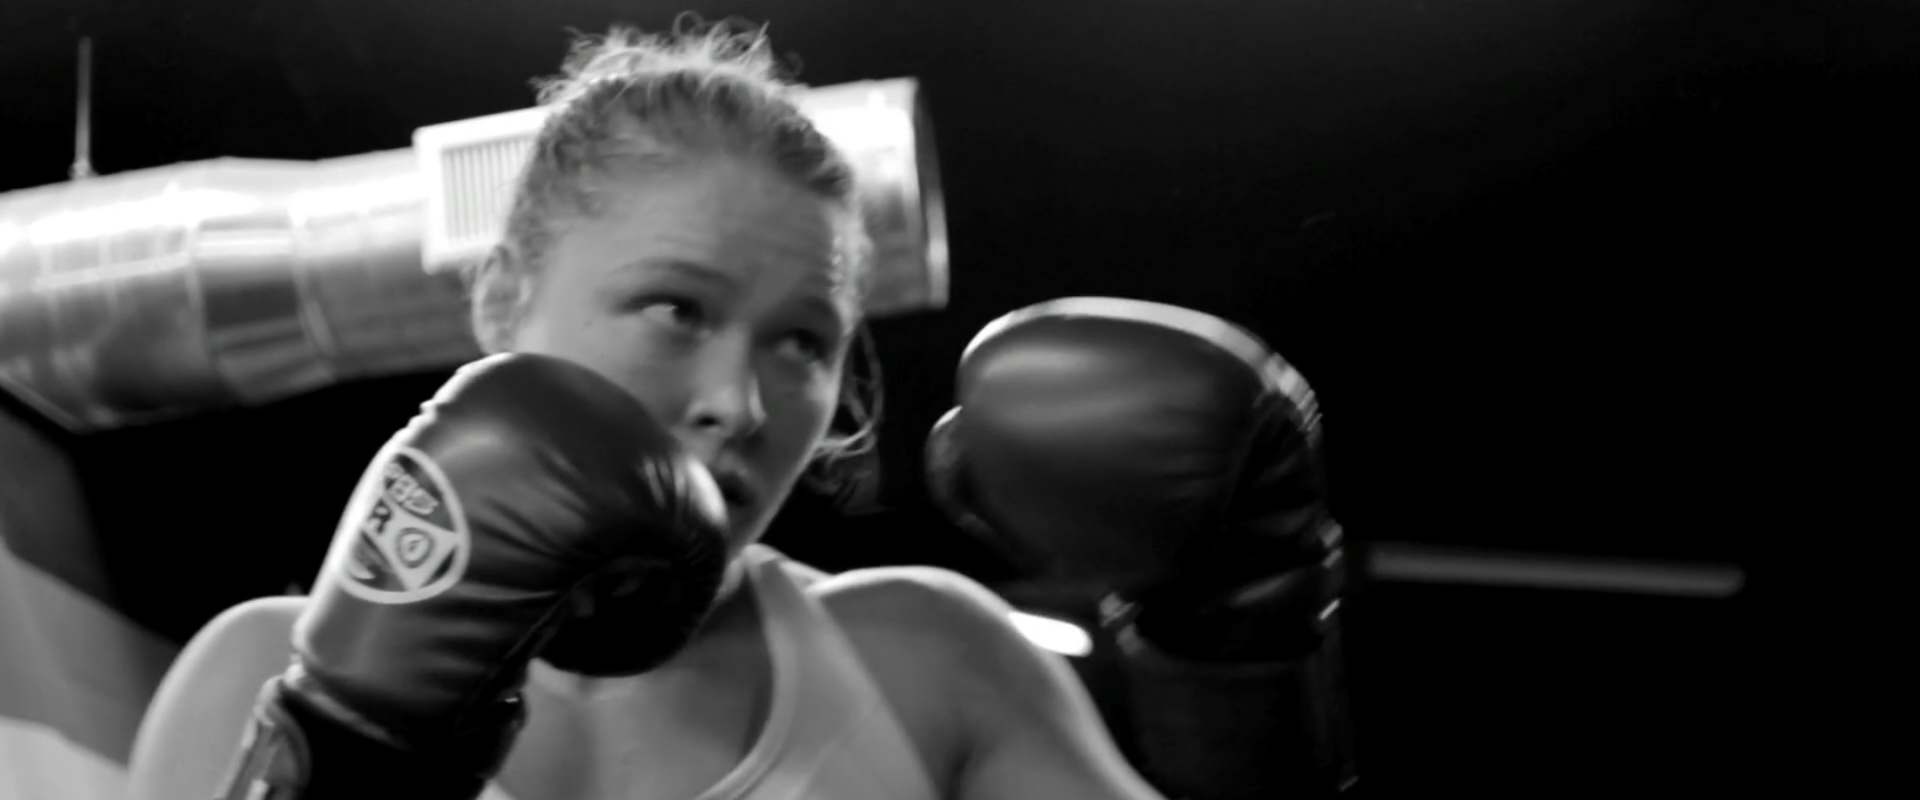 The Ronda Rousey Story: Through My Father's Eyes background 2